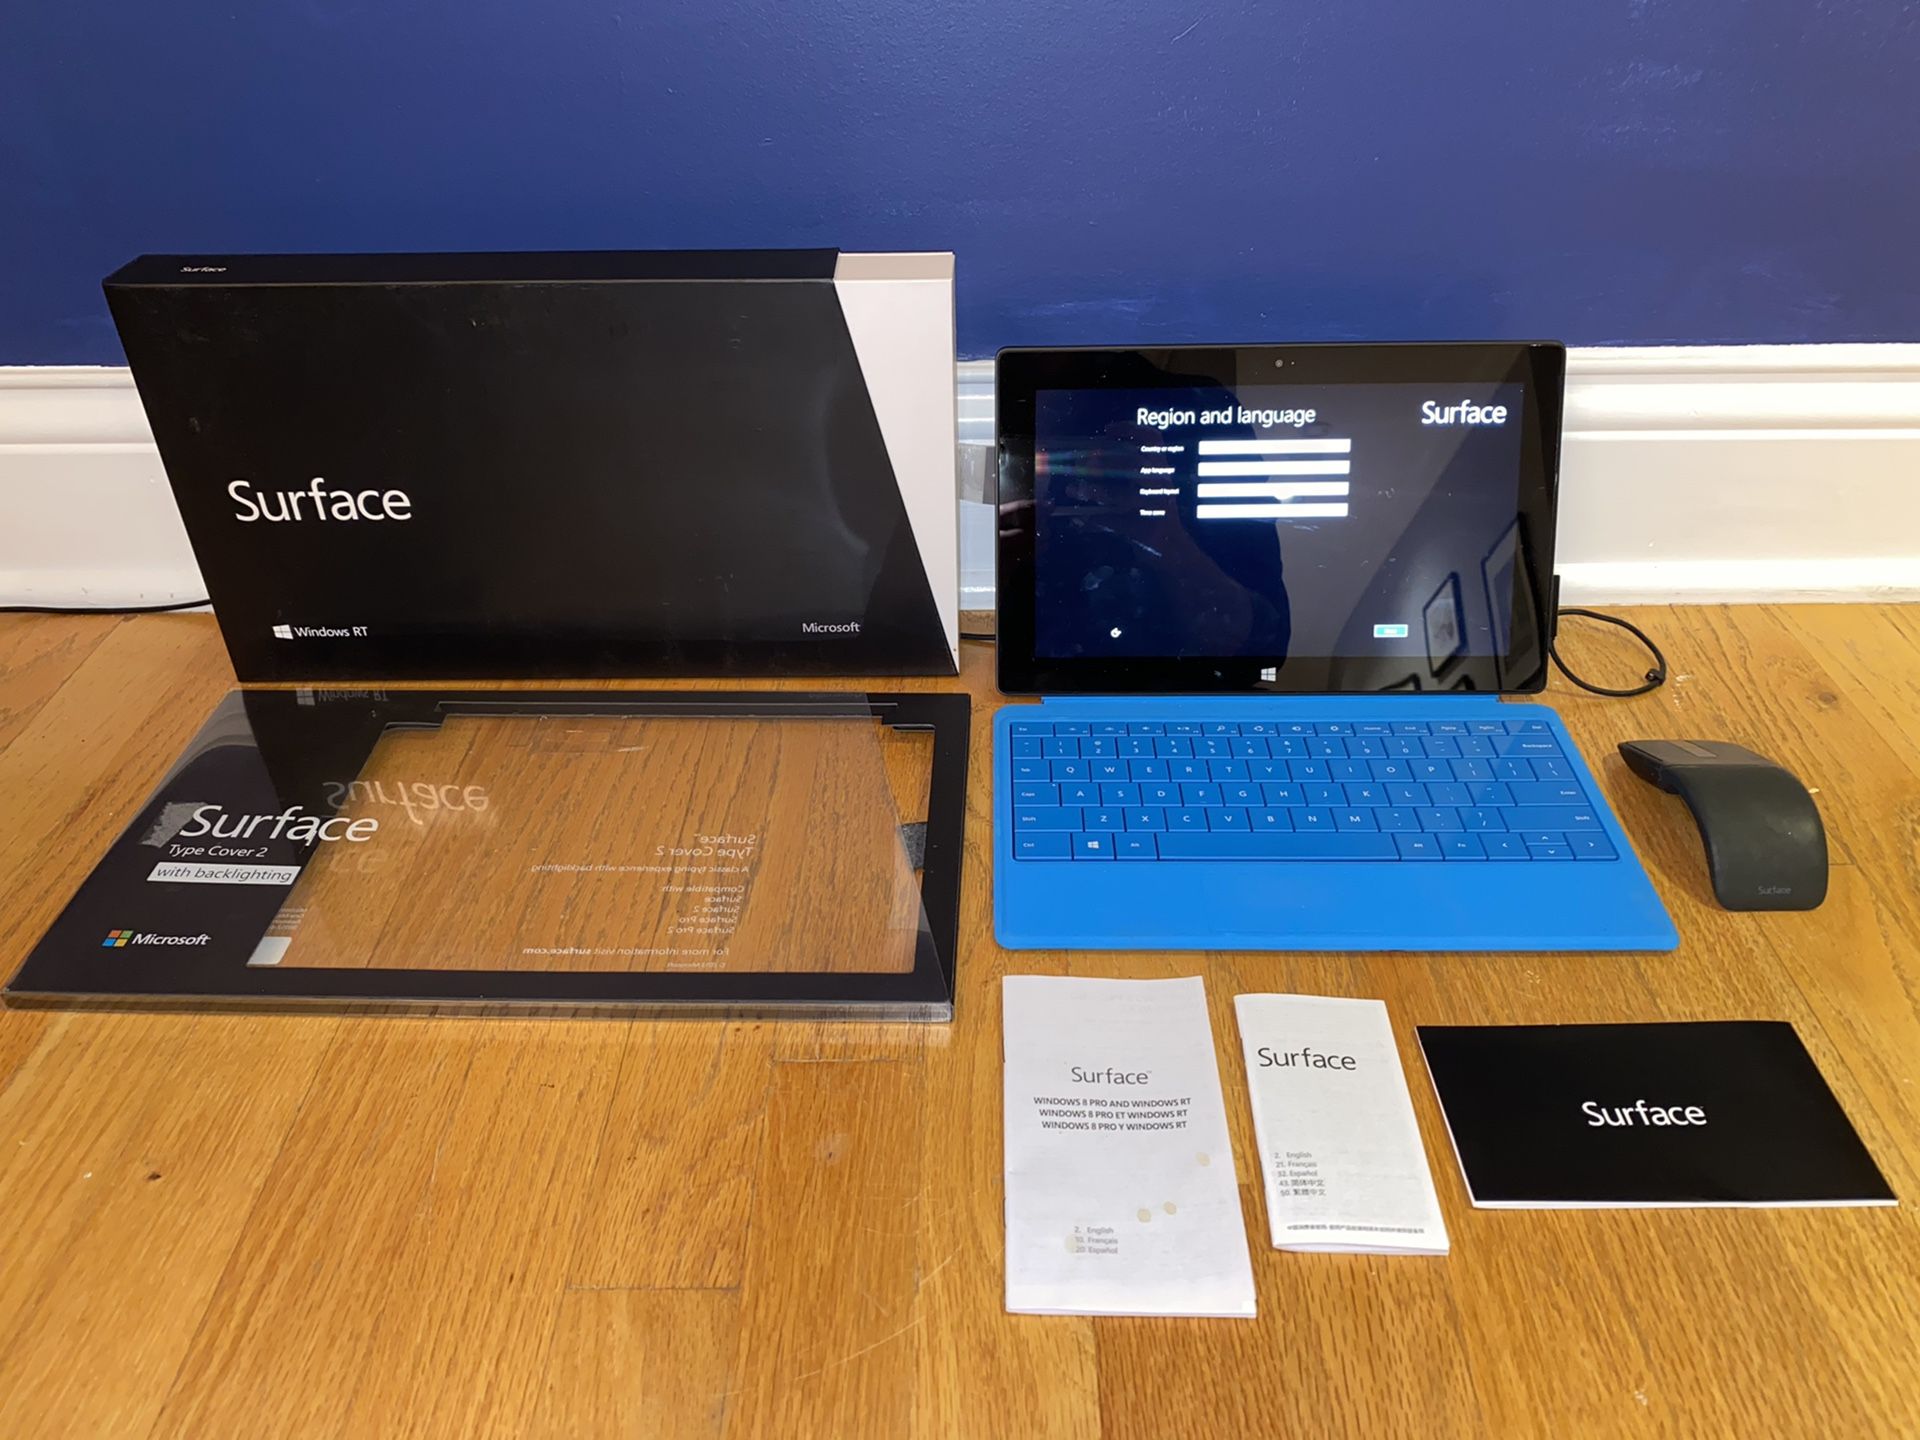 Microsoft Surface RT Tablet Laptop Computer with Keyboard and Microsoft Arc Bluetooth Mouse